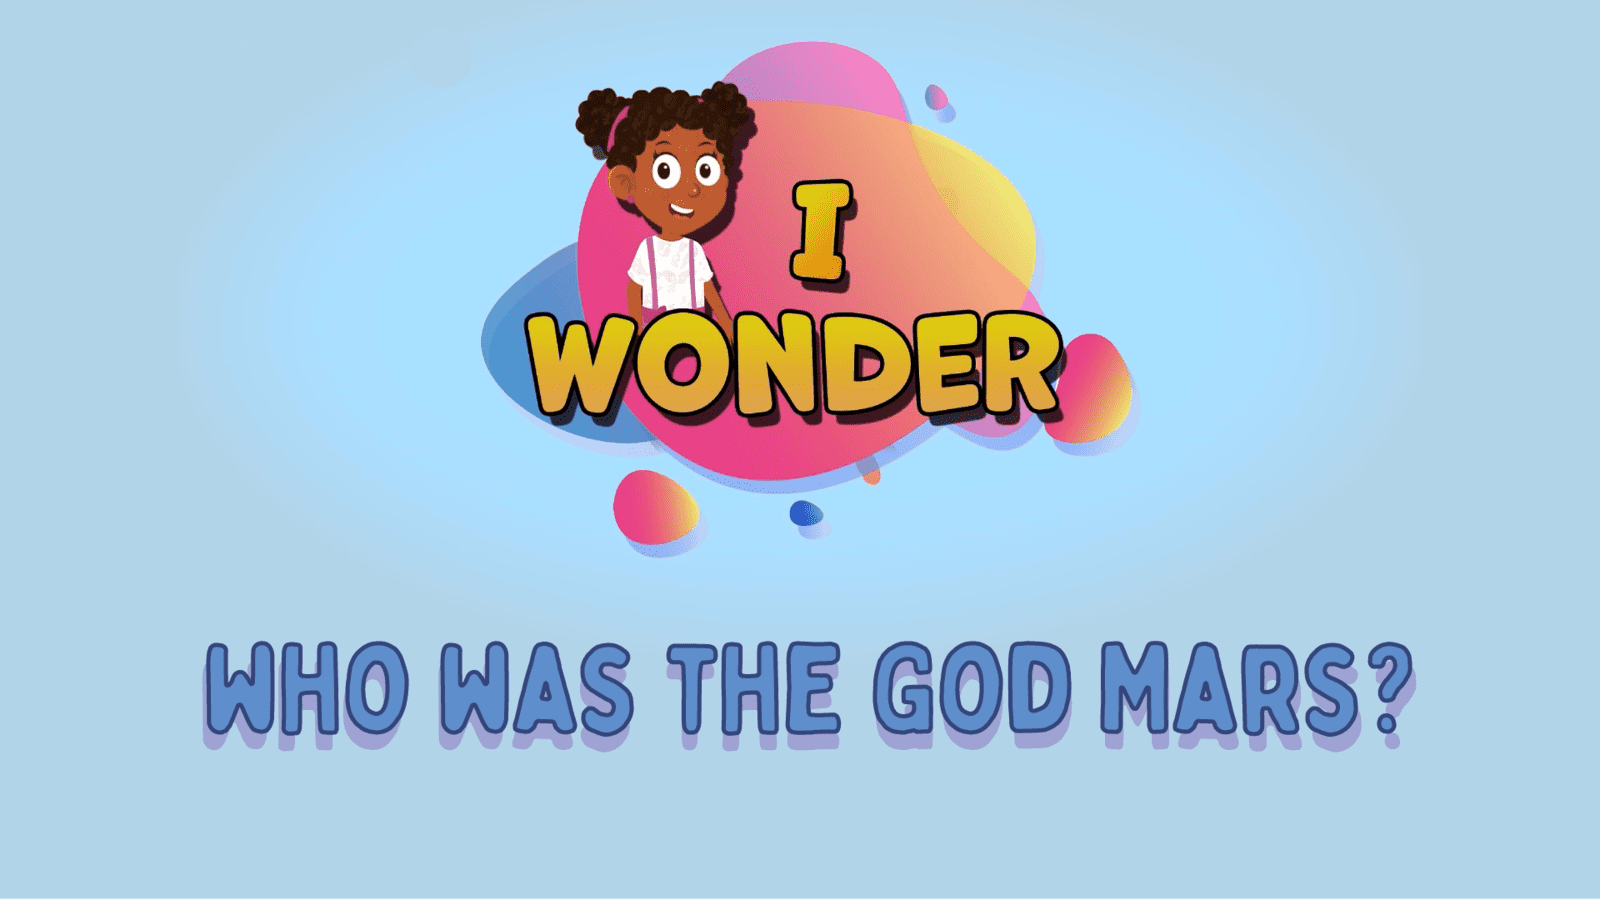 Who Was the God Mars?